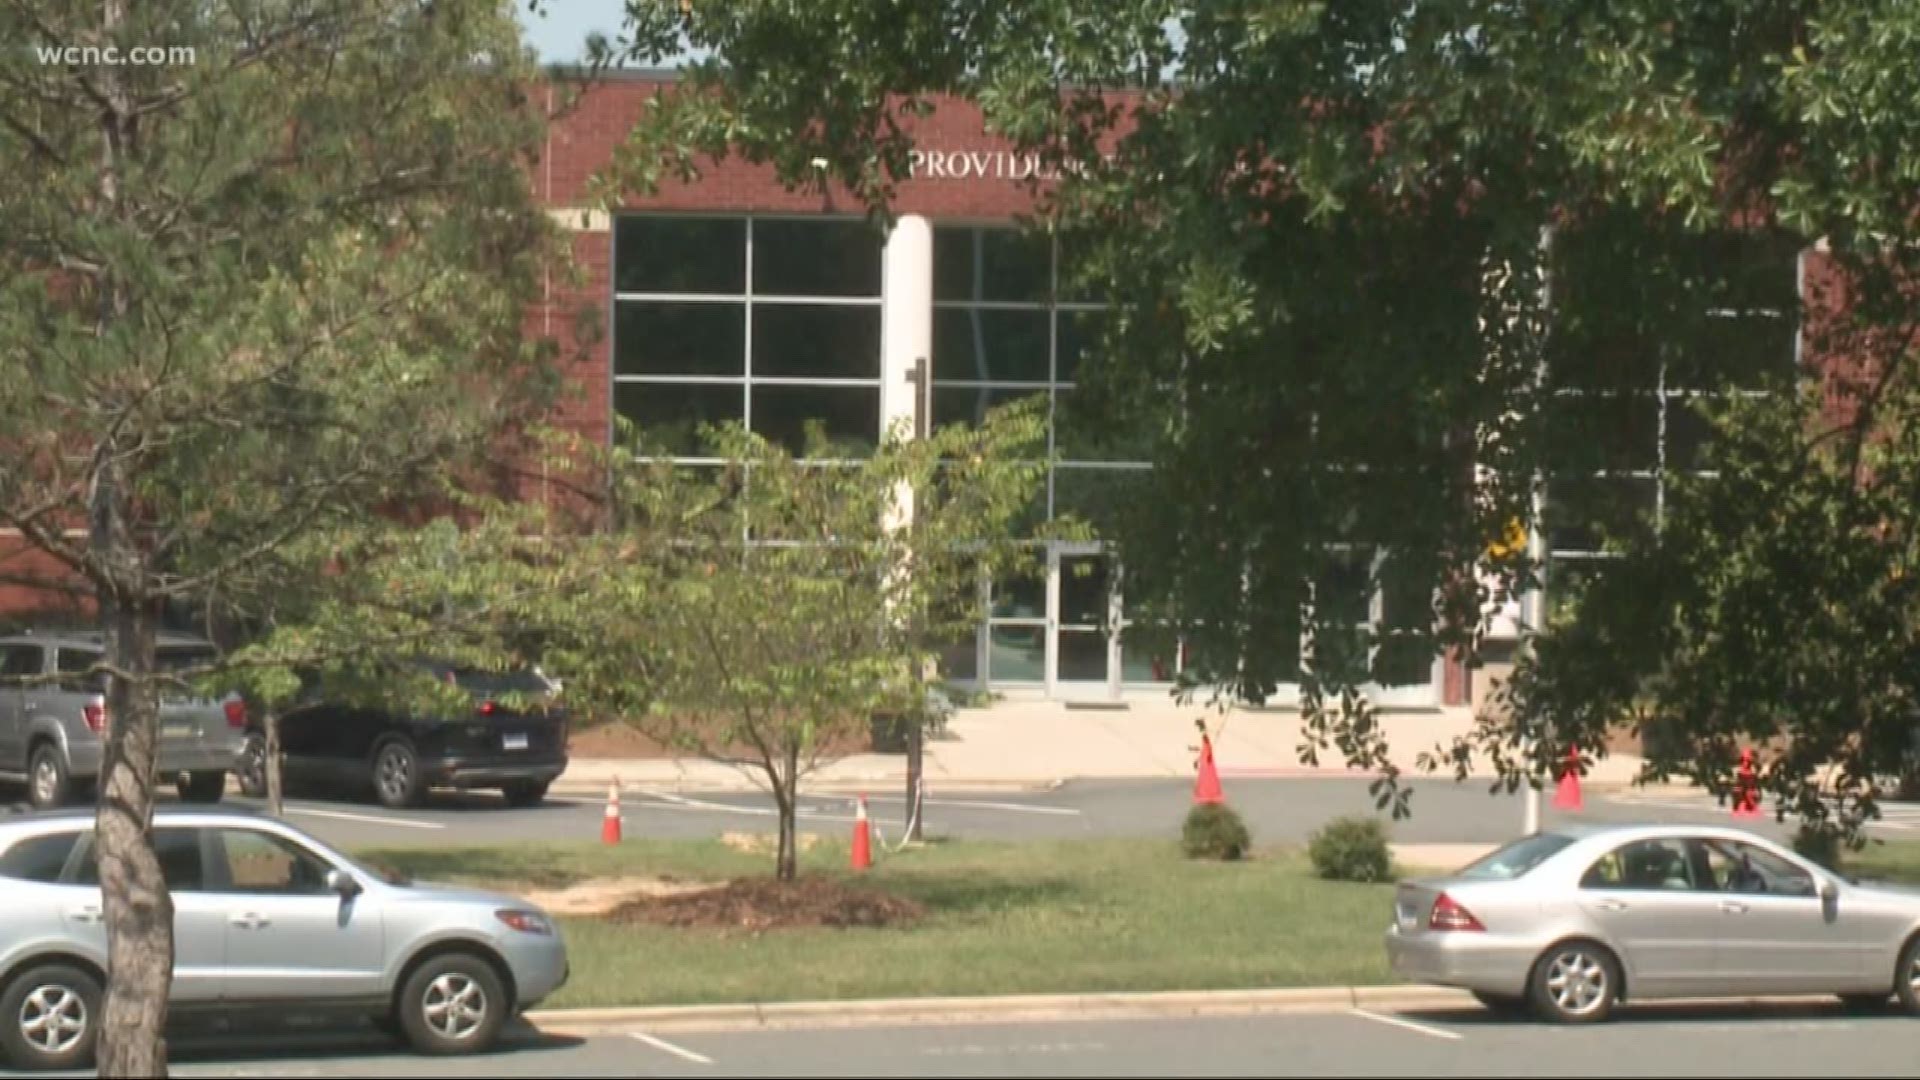 According to CMPD, a 16-year-old girl found the note at the school last week. Police say they are not releasing details about the note because it’s part of the ongoing criminal investigation.